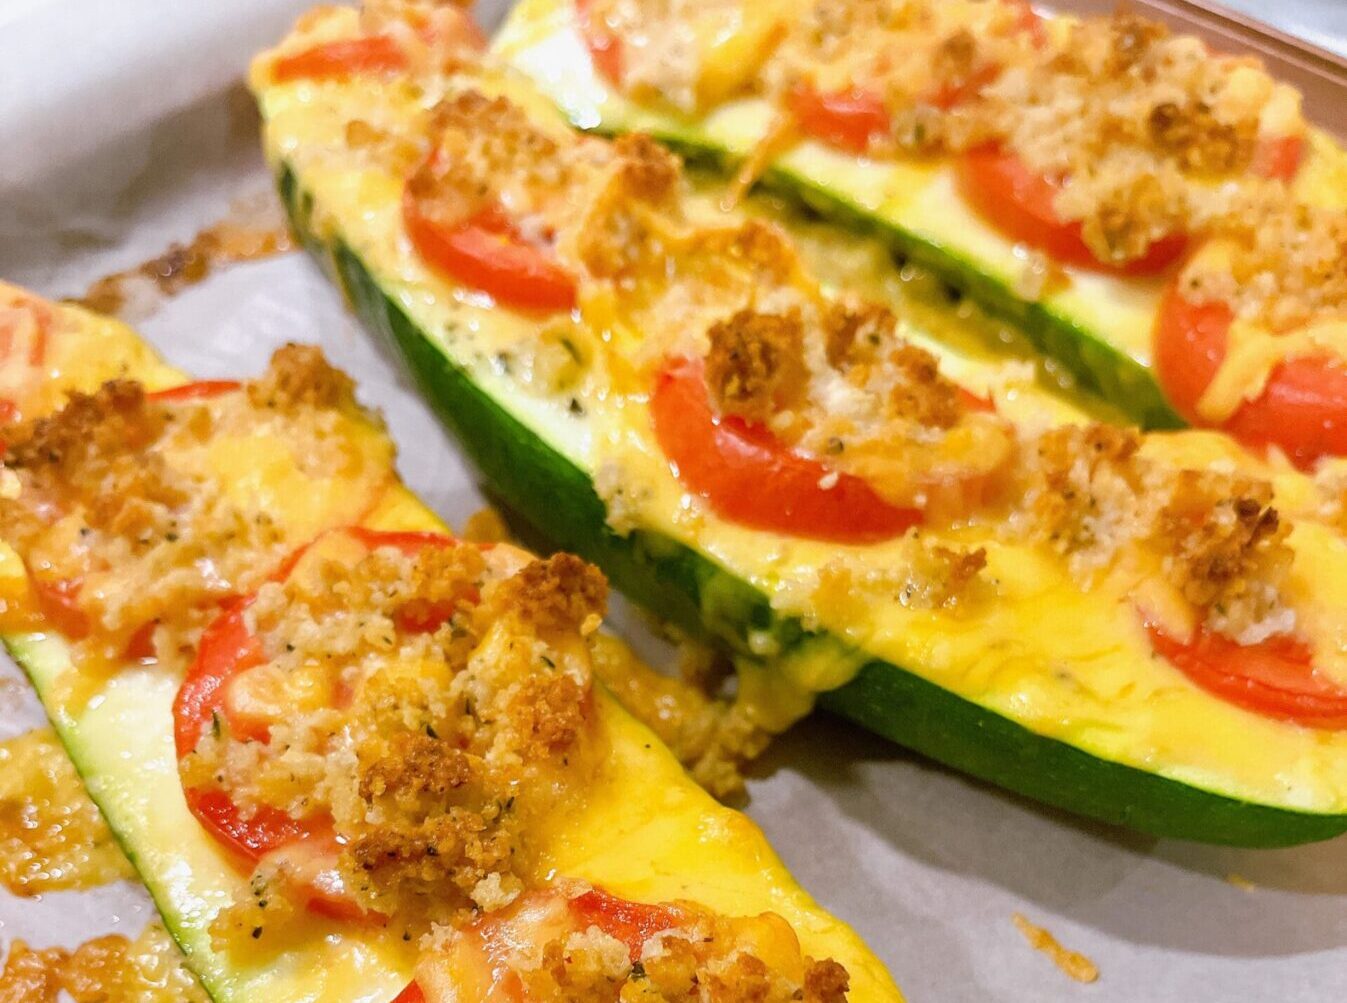 Baked Zucchini With Tomatoes and Gouda Cheese